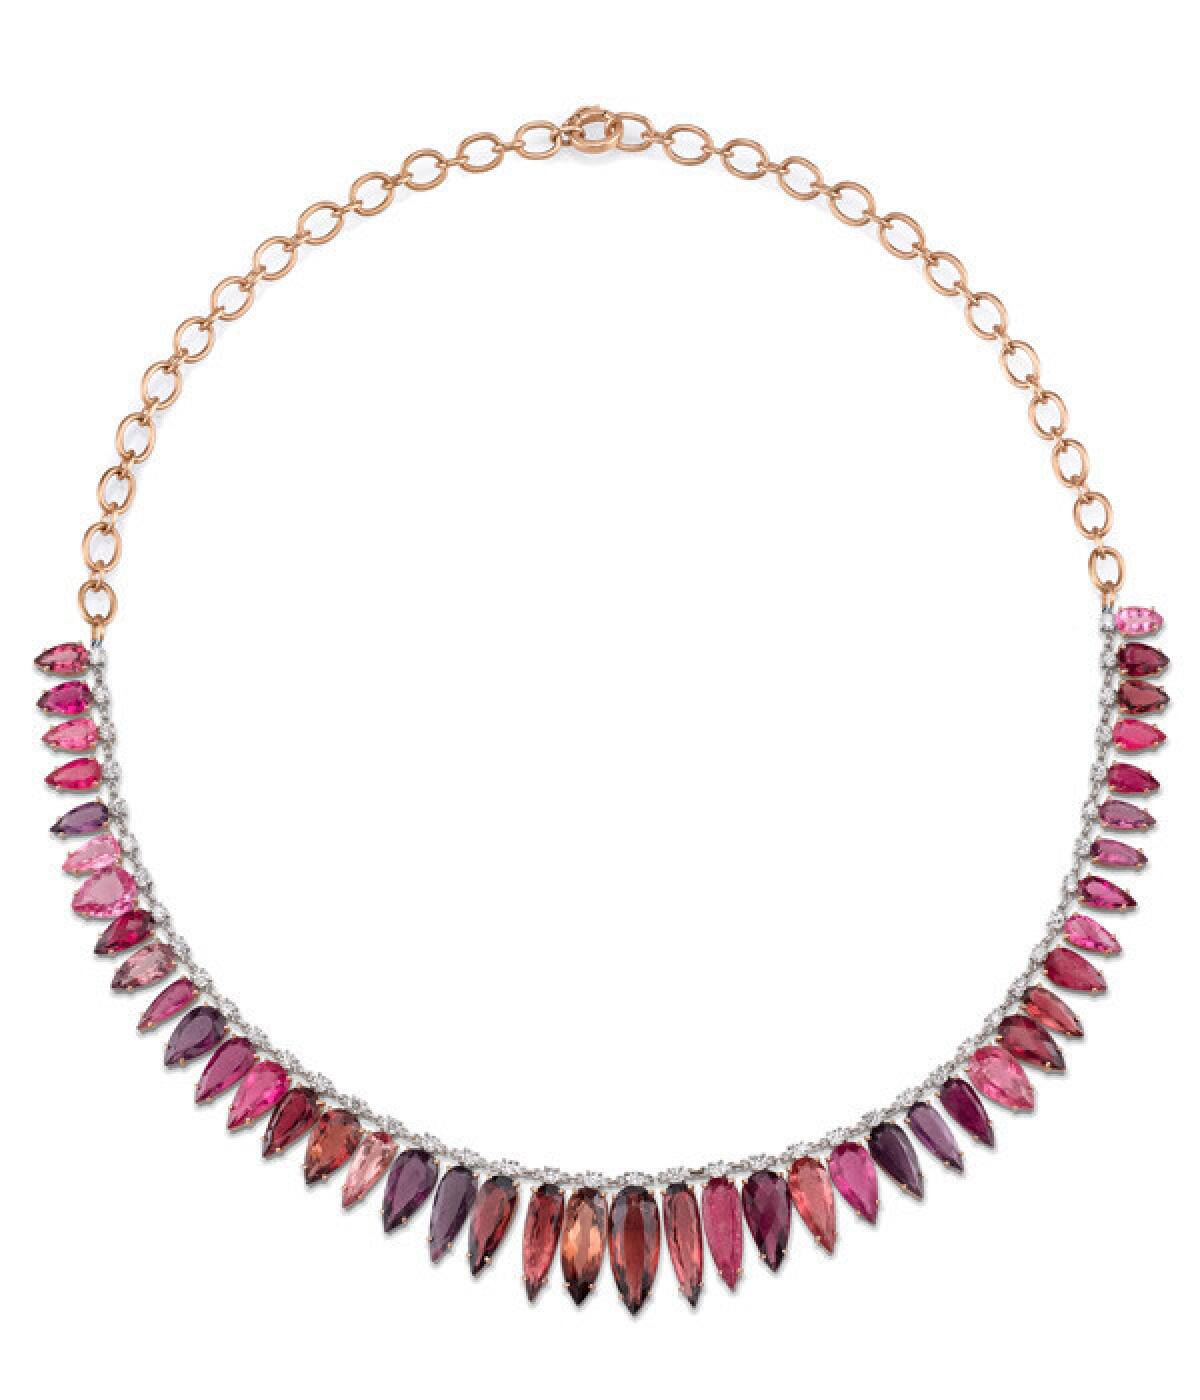 Irene Neuwirth one-of-a-kind 18-karat rose and white gold necklace with pink tourmaline and full cut diamonds.